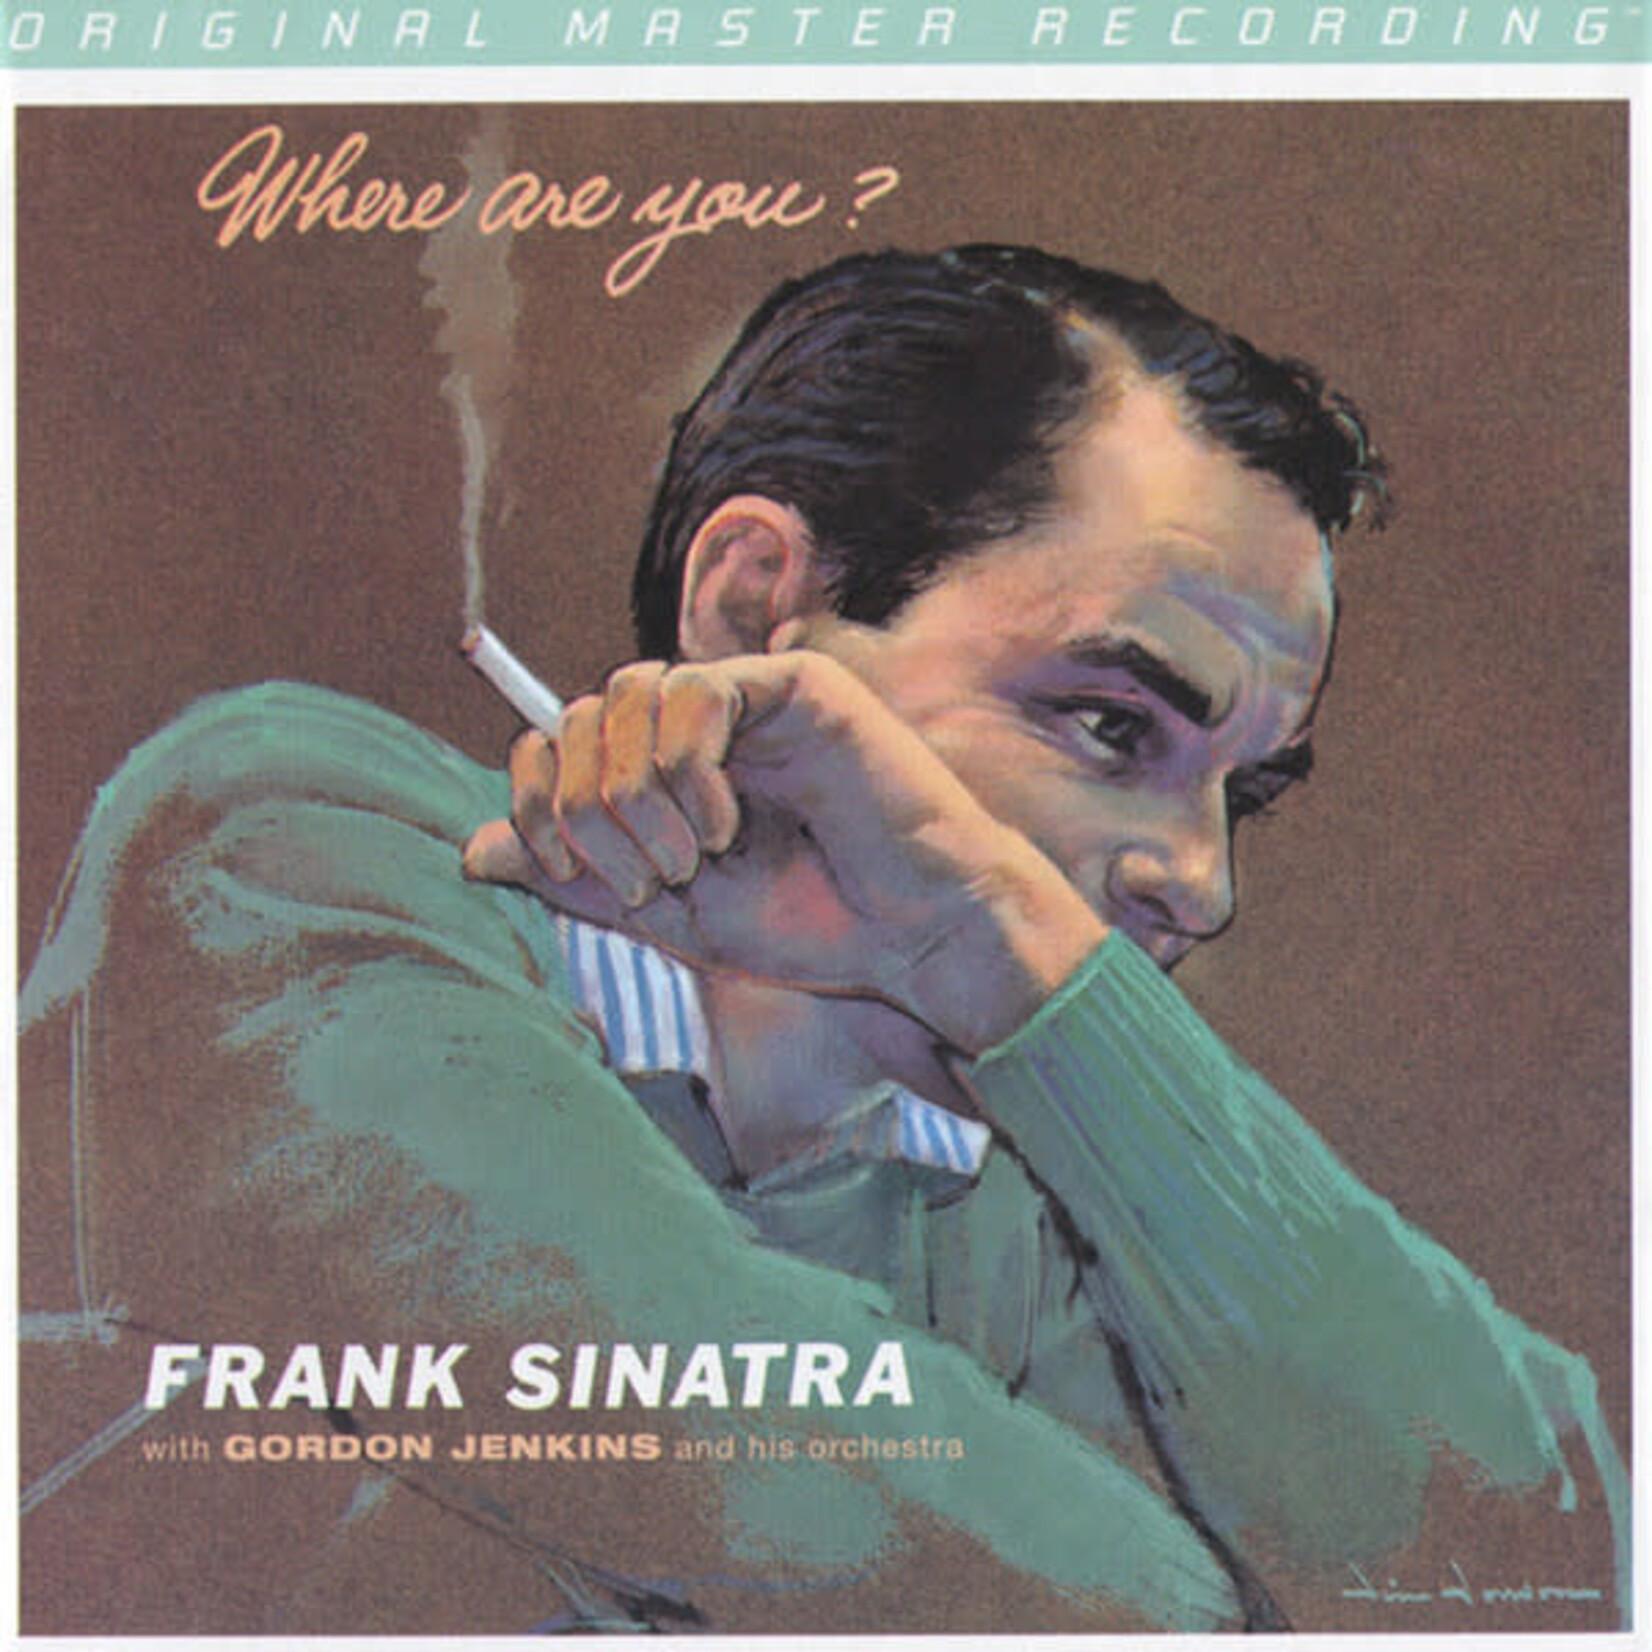 Sinatra, Frank: Where Are You? (2012 Mobile Fidelity, Audiophile) [KOLLECTIBLES]